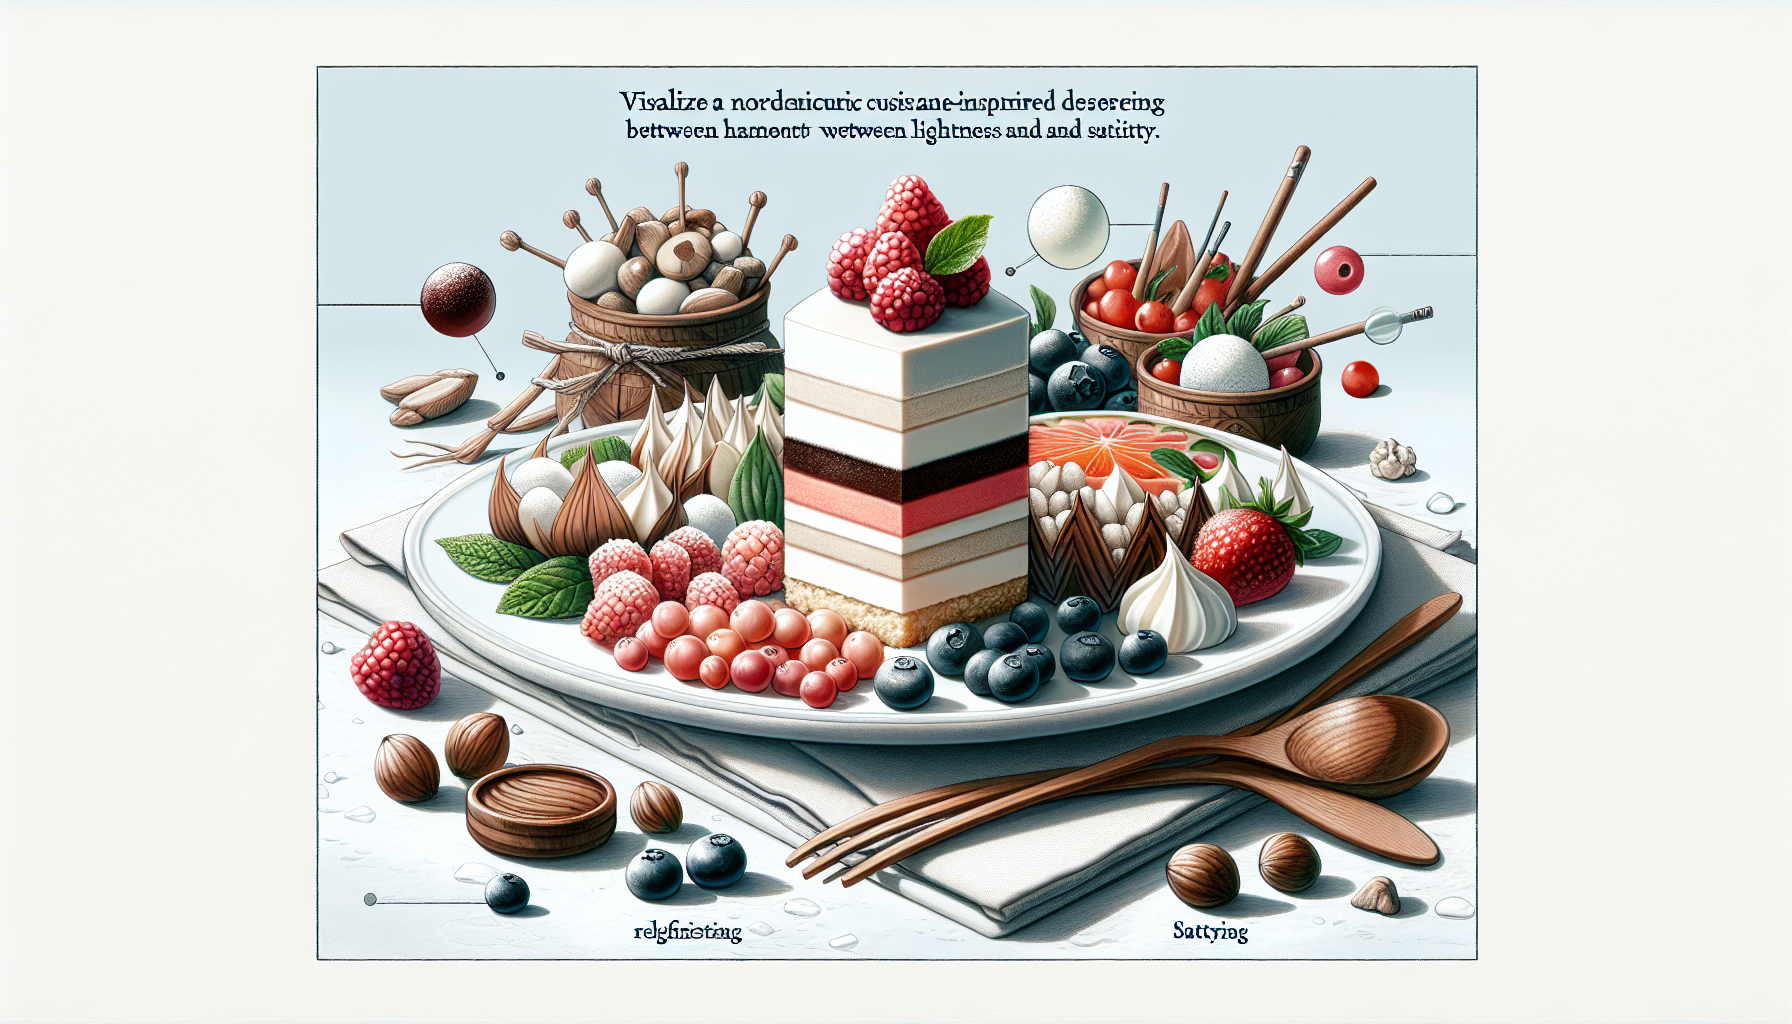 can you suggest a nordic dessert thats both light and satisfying 2